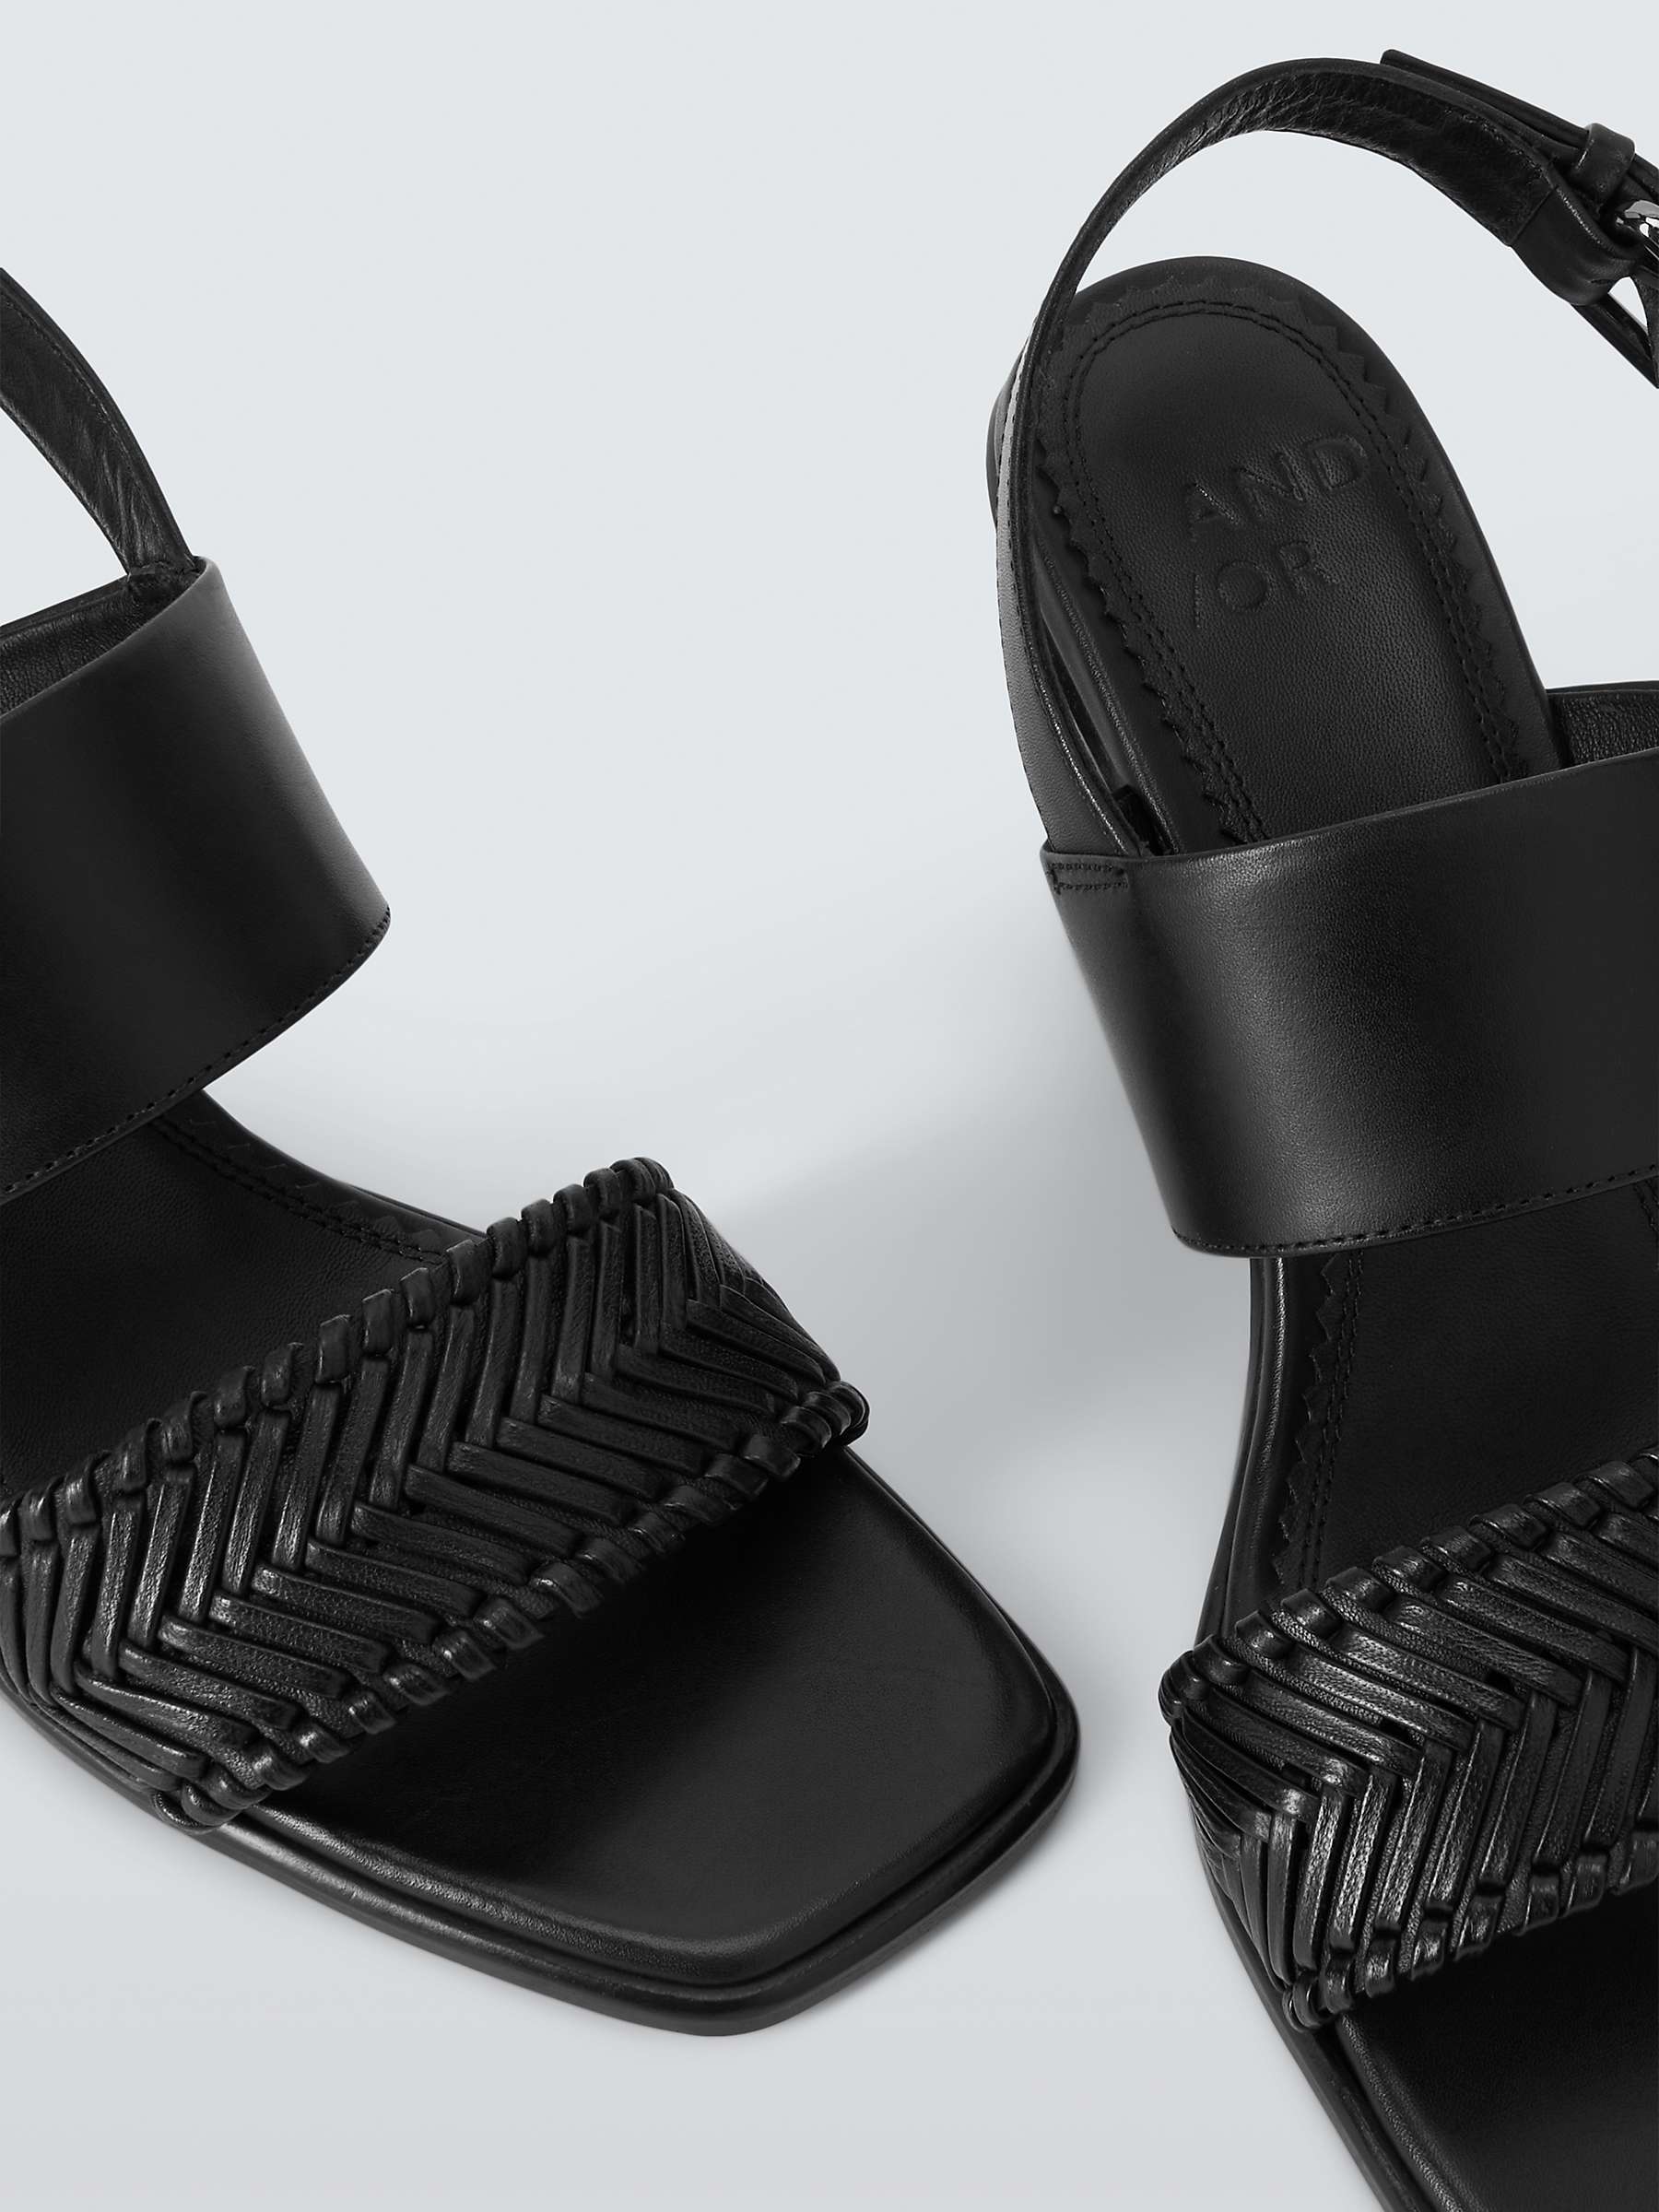 Buy AND/OR Japonica Leather Woven Strap Stacked Heel Sandals, Black Online at johnlewis.com